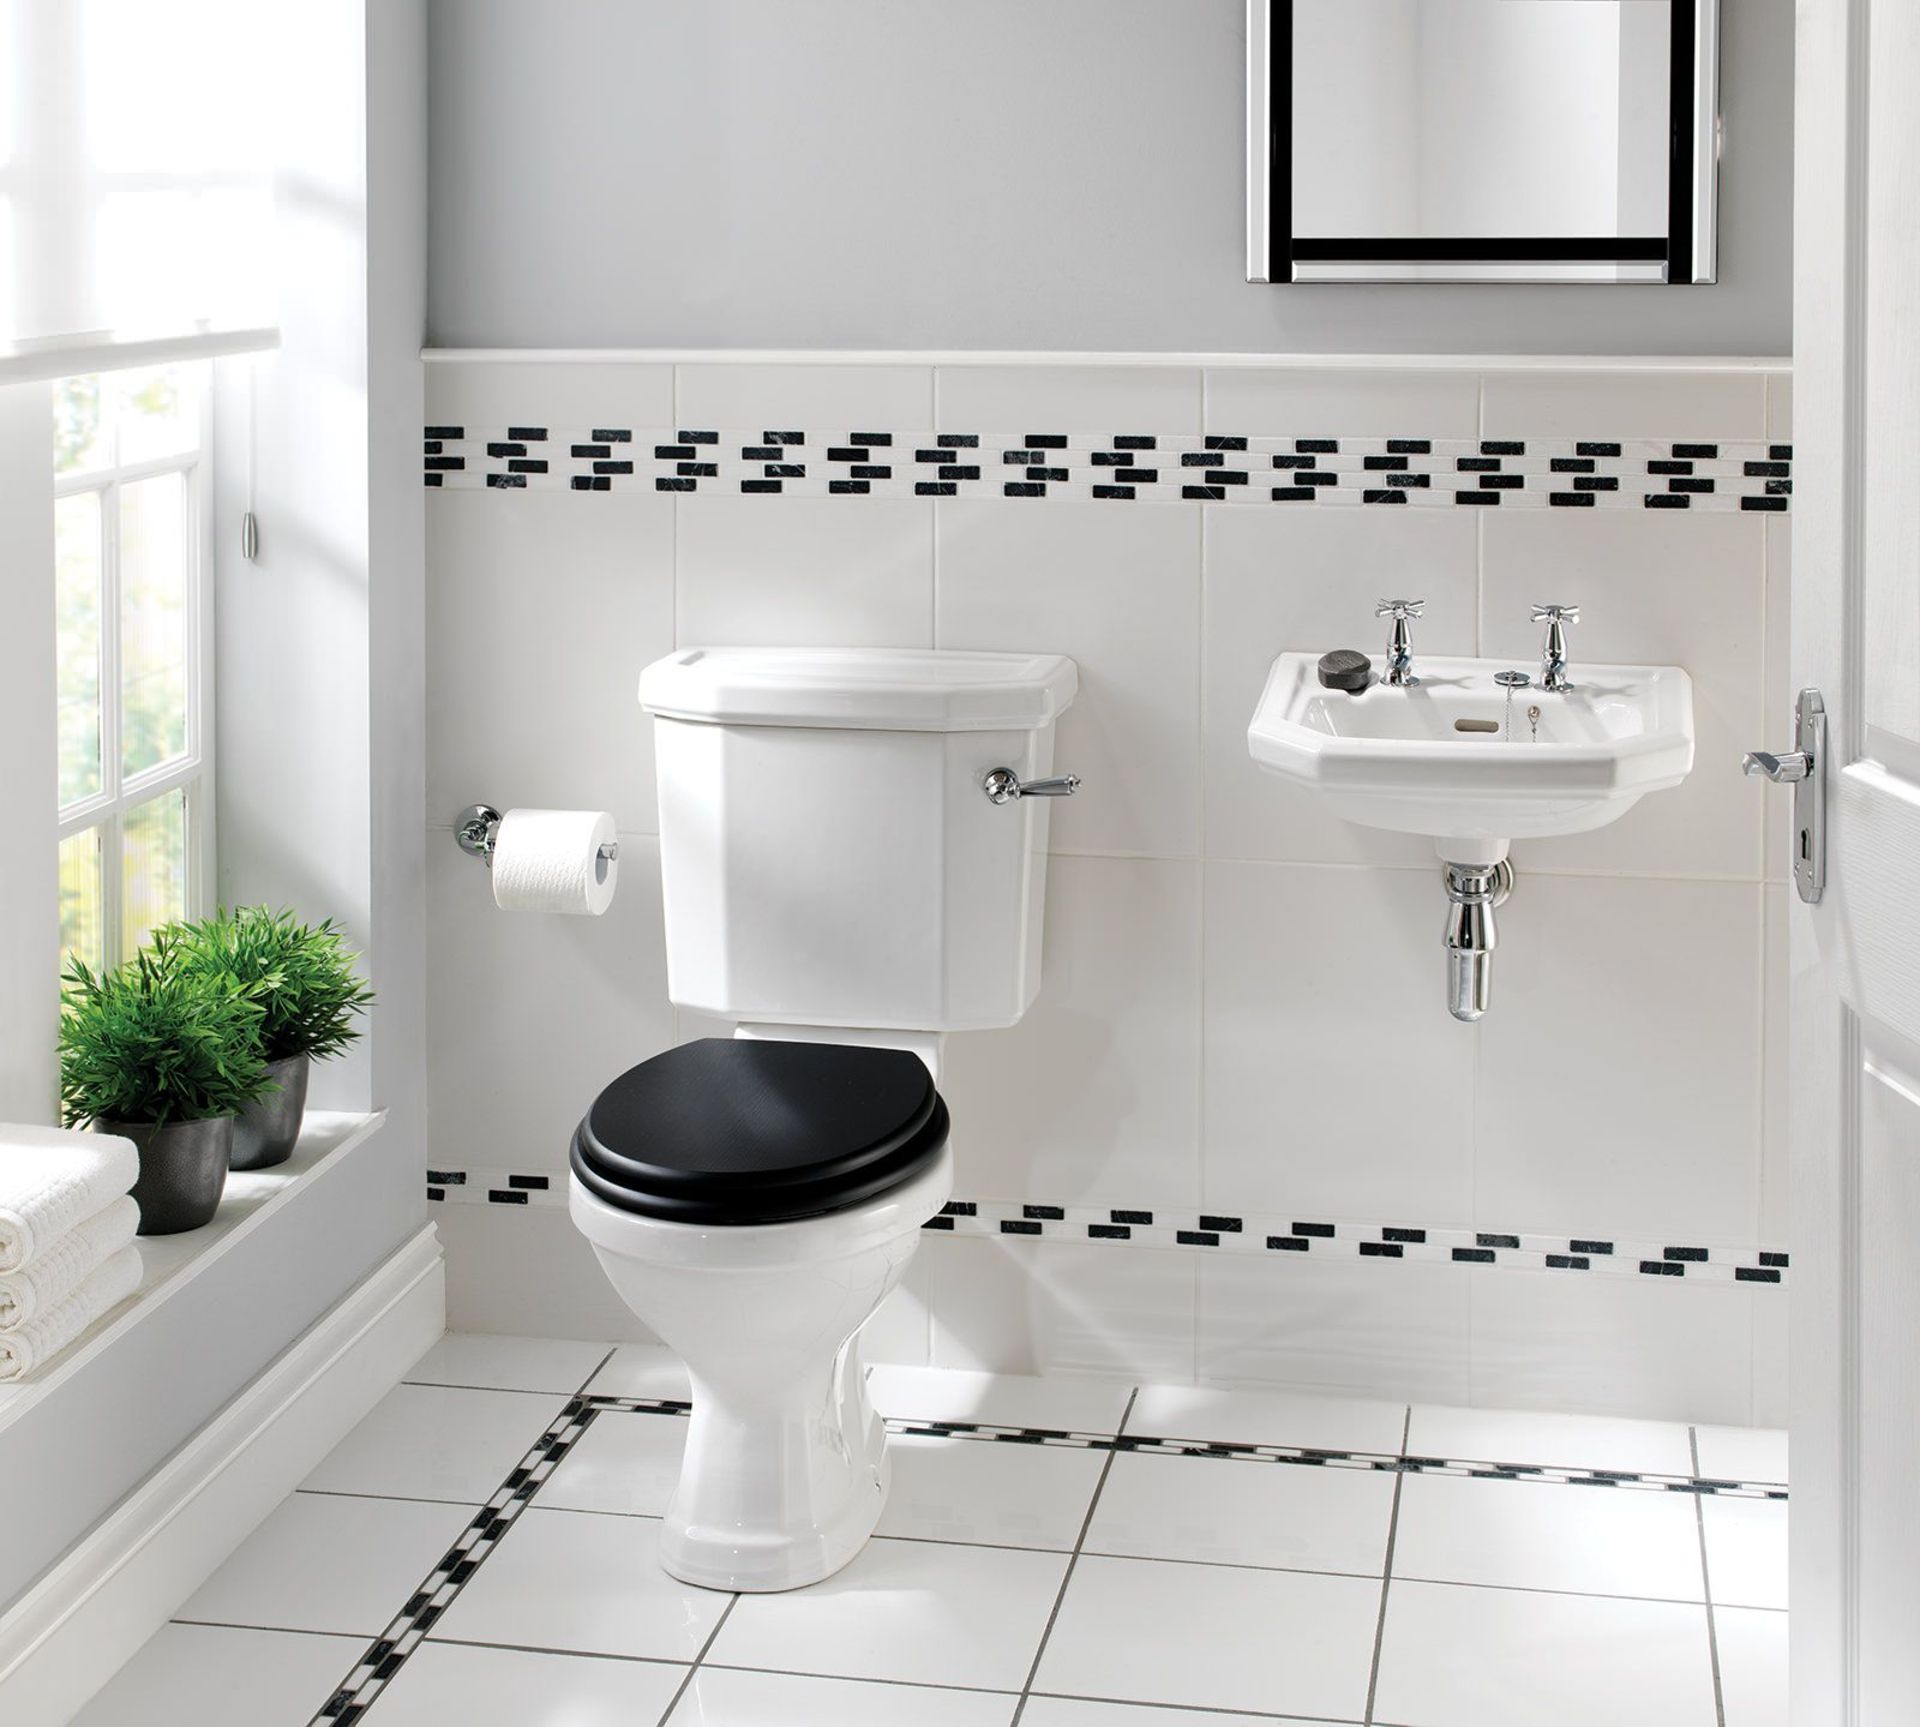 Twyford Clarice Close Coupled Toilet Set. Product Code: Cl1148Wh The Clarice Close Coupled W...